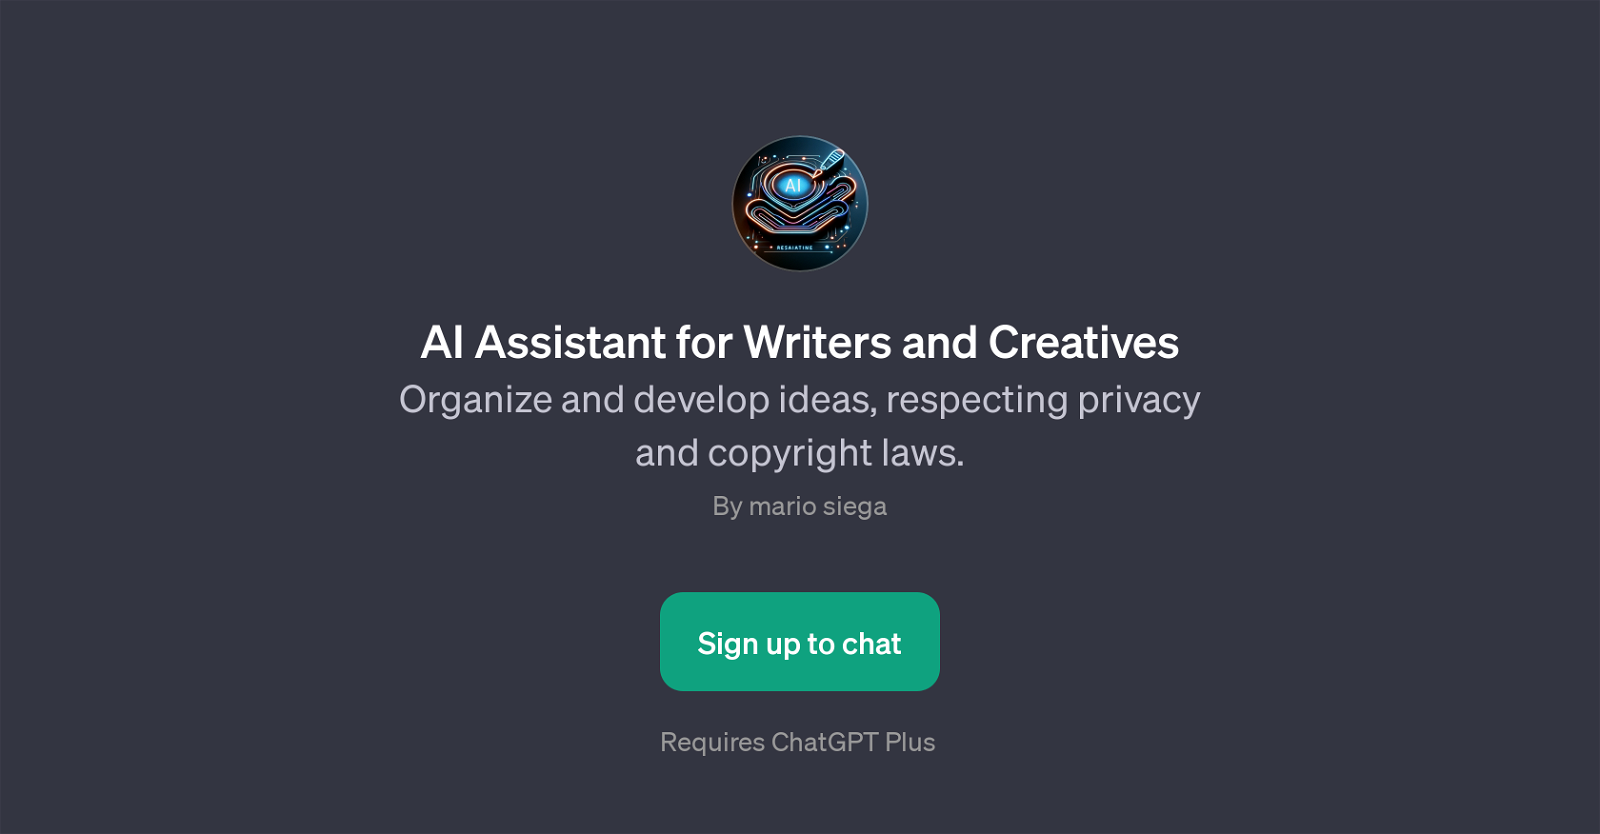 AI Assistant for Writers and Creatives website